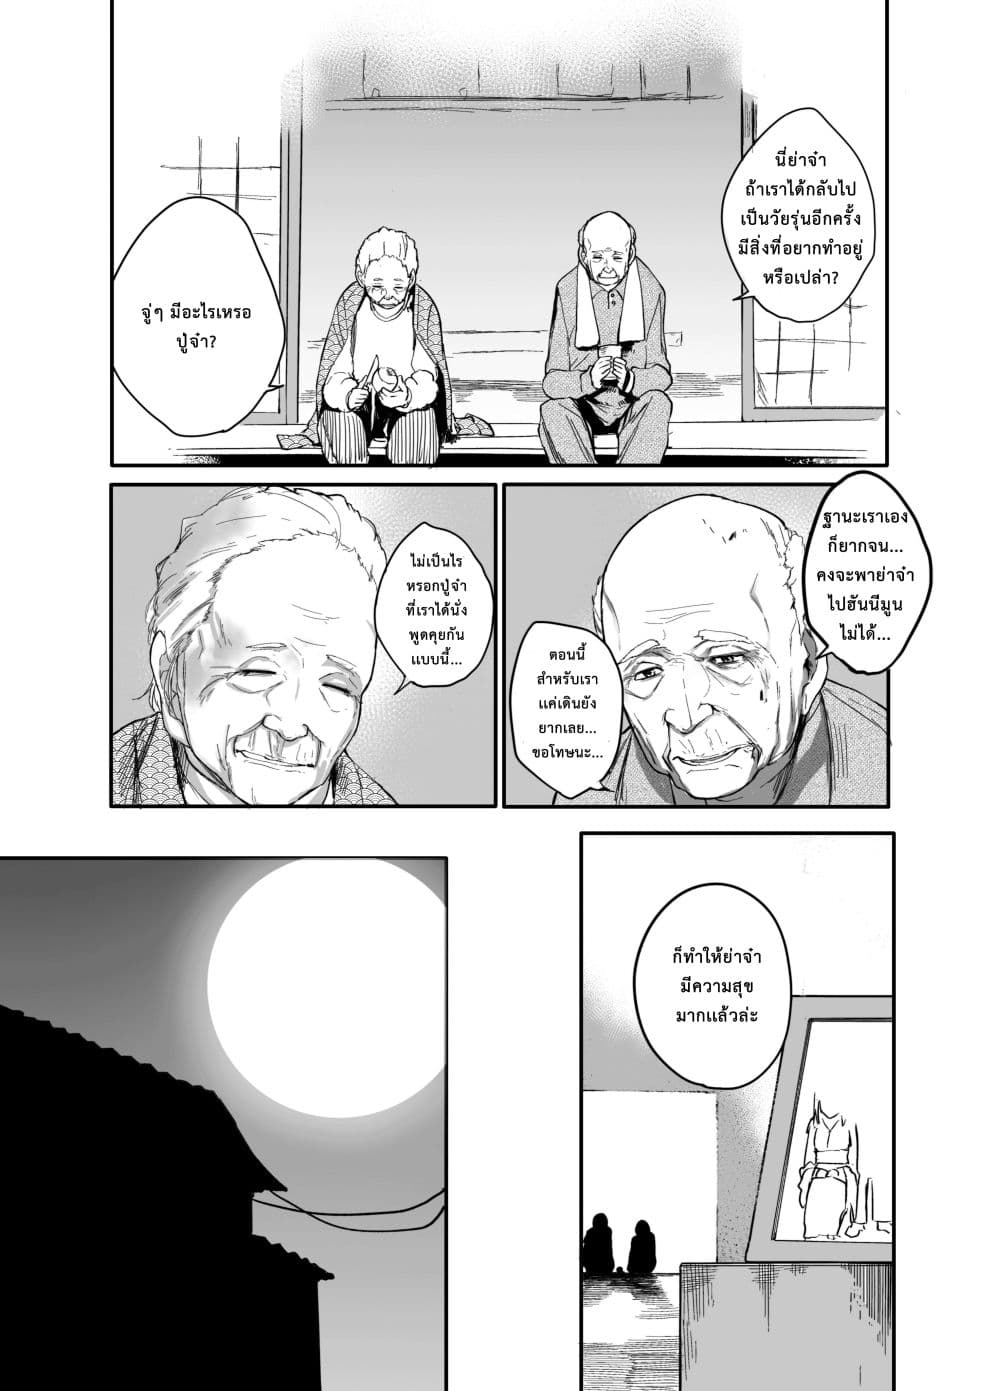 A Story About A Grampa and Granma Returned Back to their Youth - 1 - 2